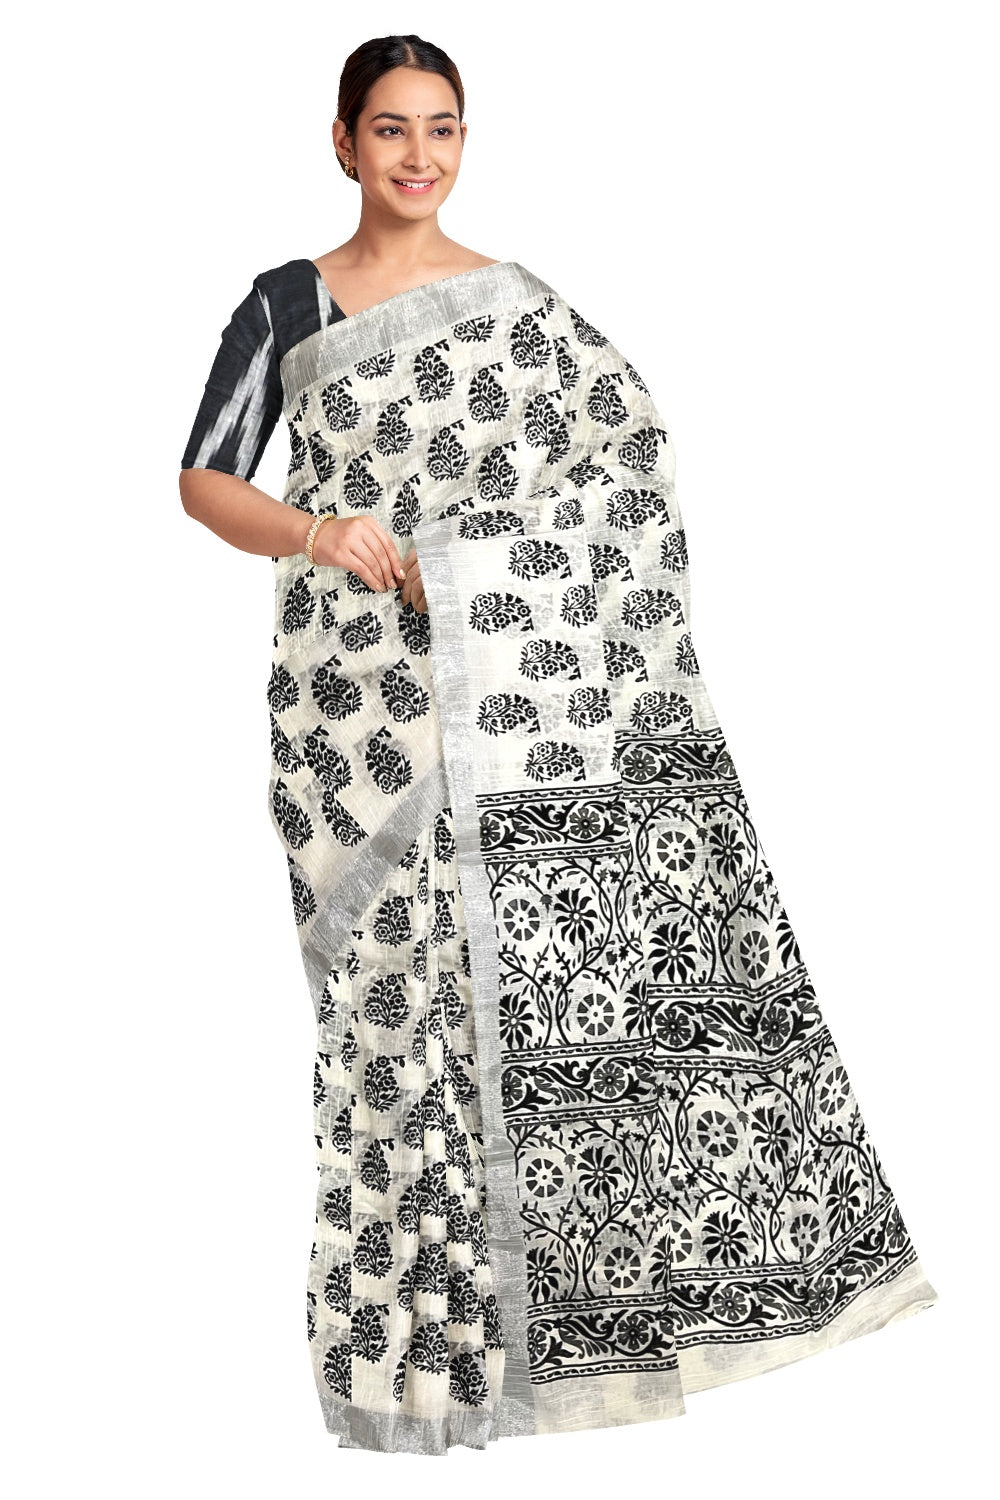 Southloom Linen Designer Saree in Black Prints on White Body and Ikat Printed Blouse Piece